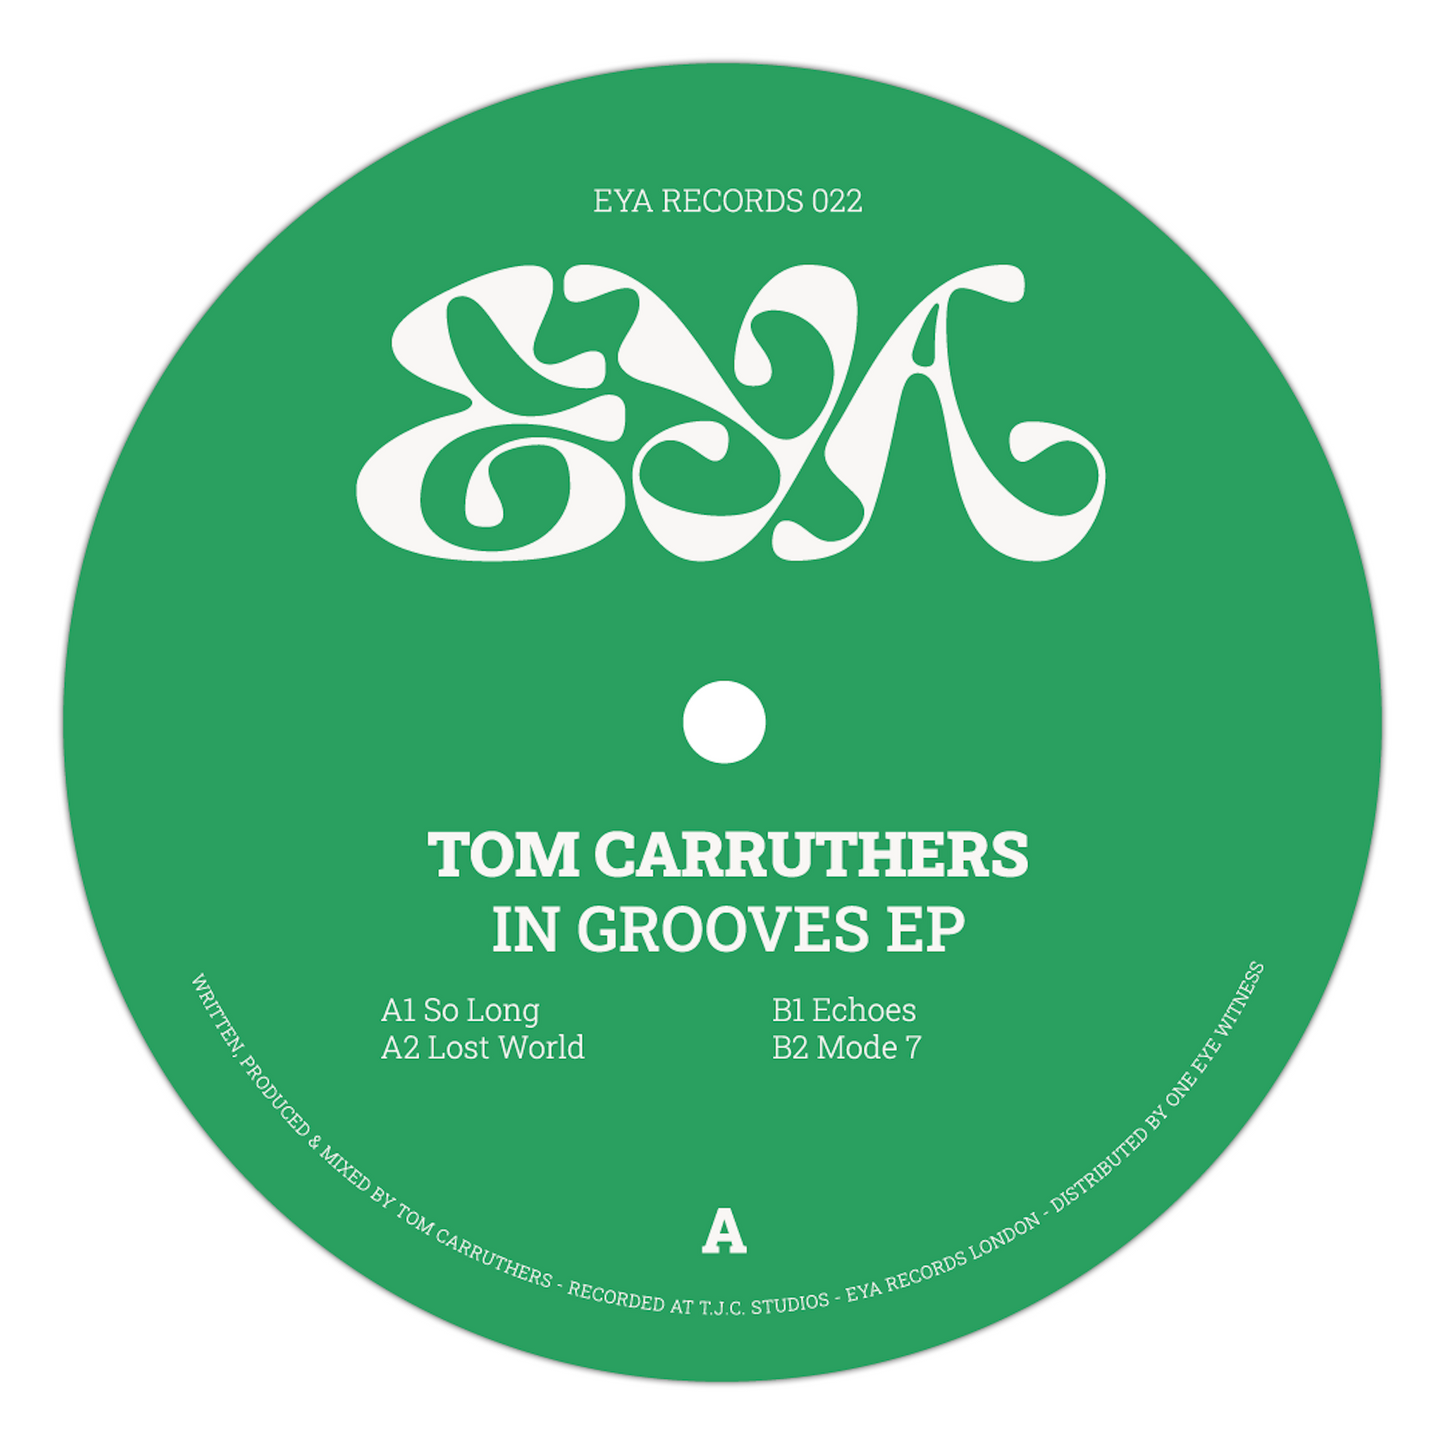 IN GROOVES EP